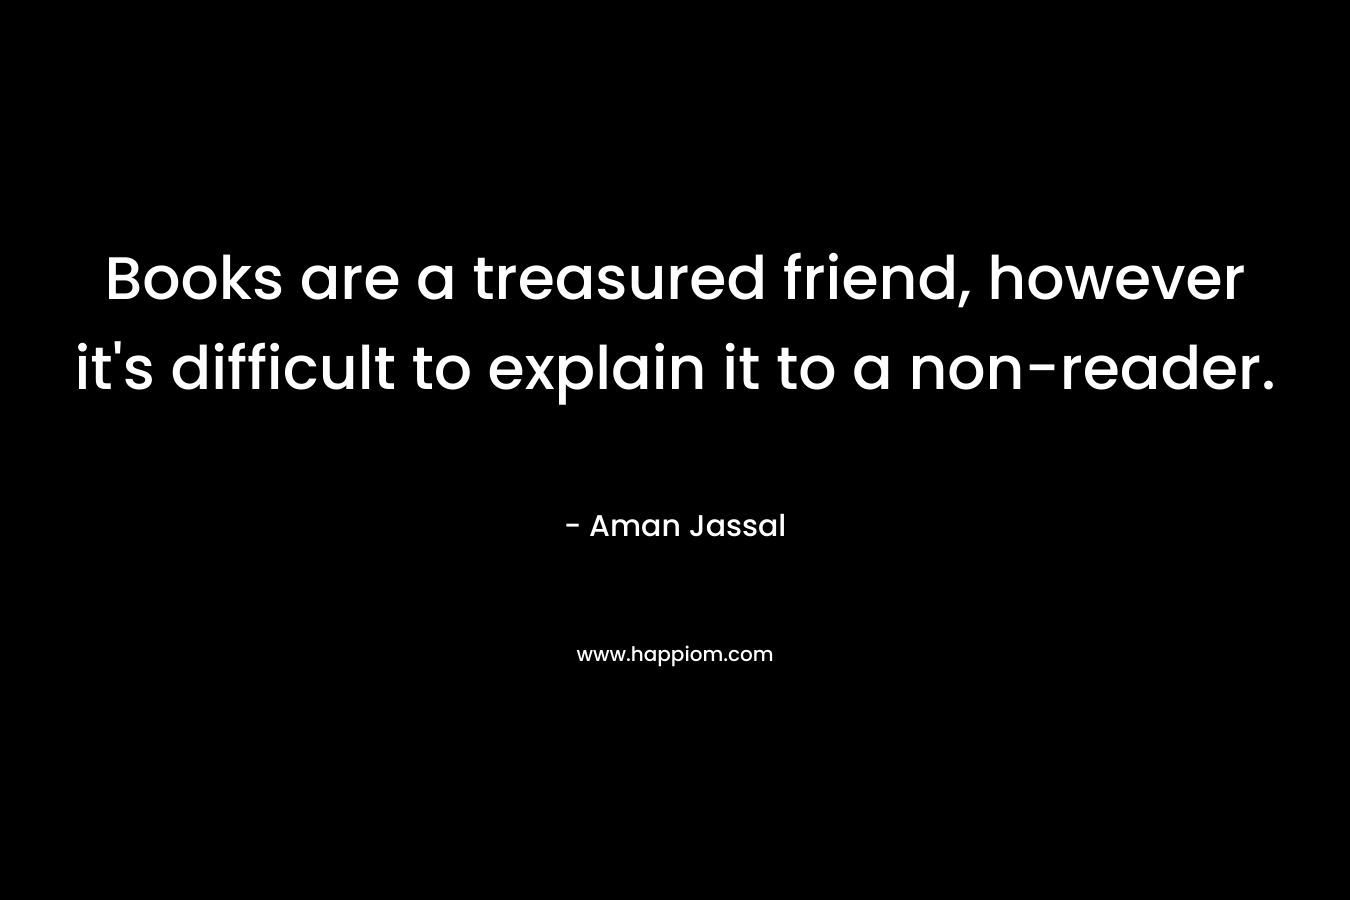 Books are a treasured friend, however it's difficult to explain it to a non-reader.